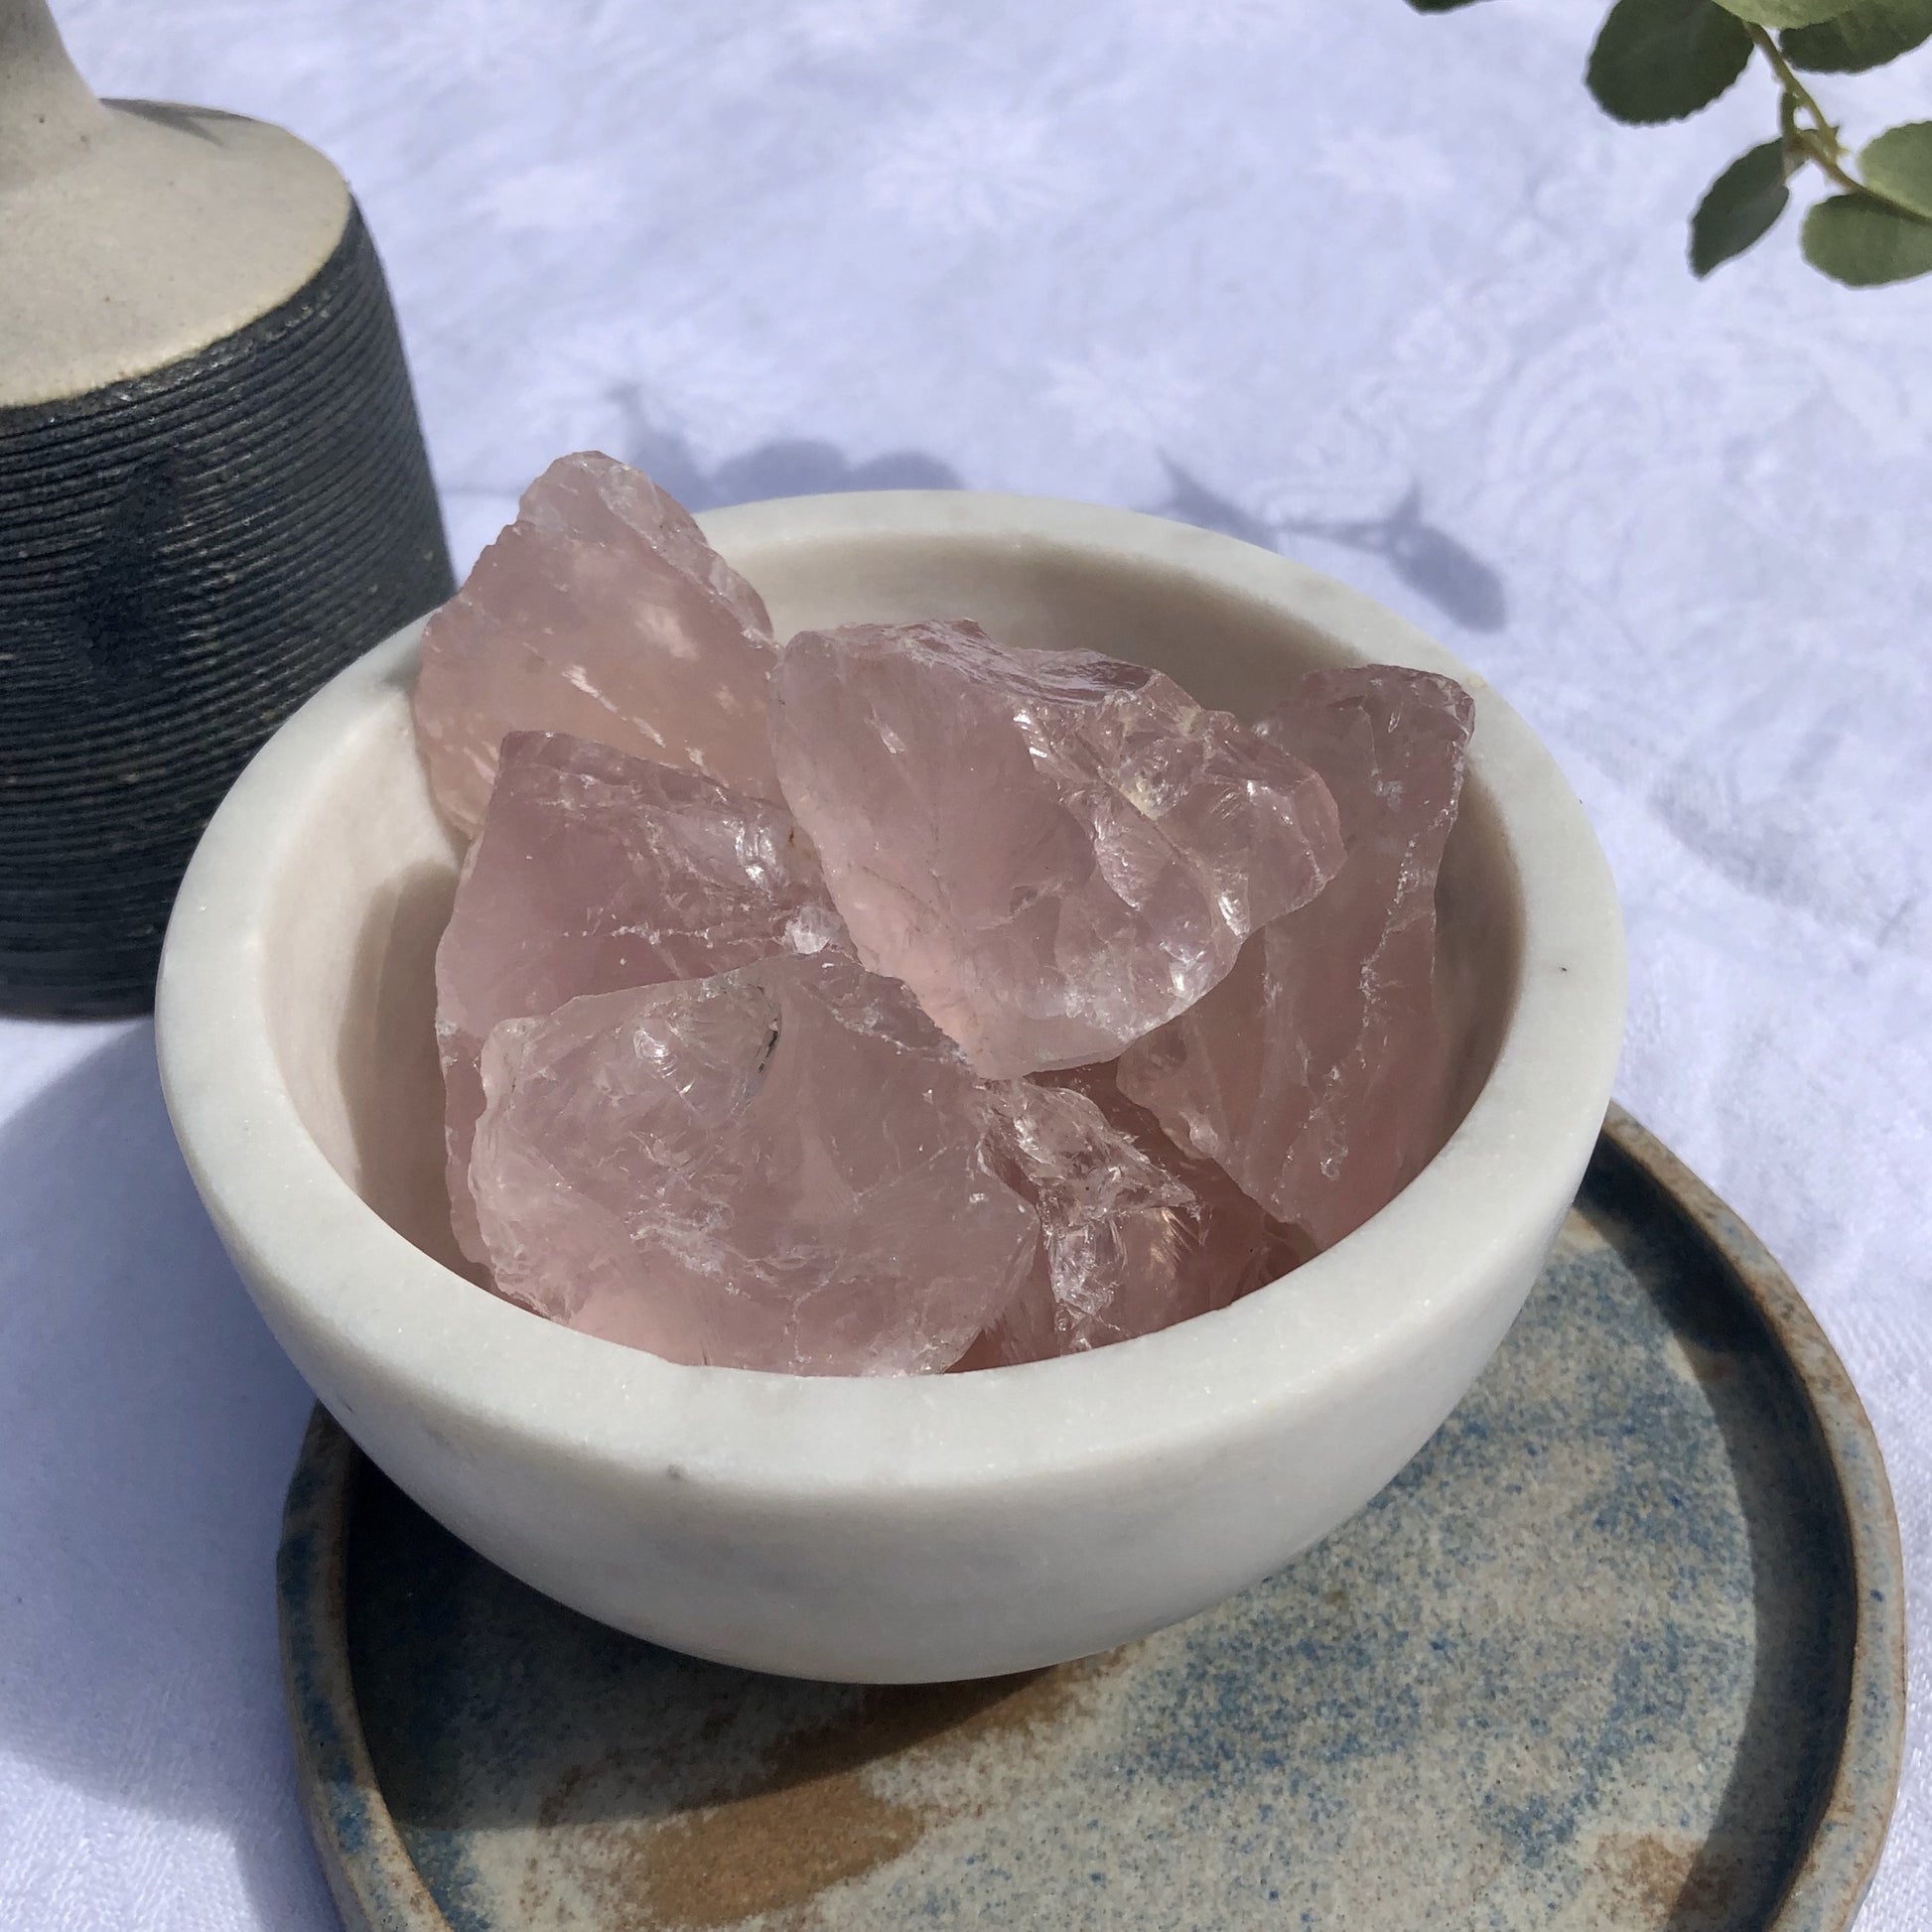 A white marble bowl of light pink gummy chunks of rose quartz crystal on a ceramic plate